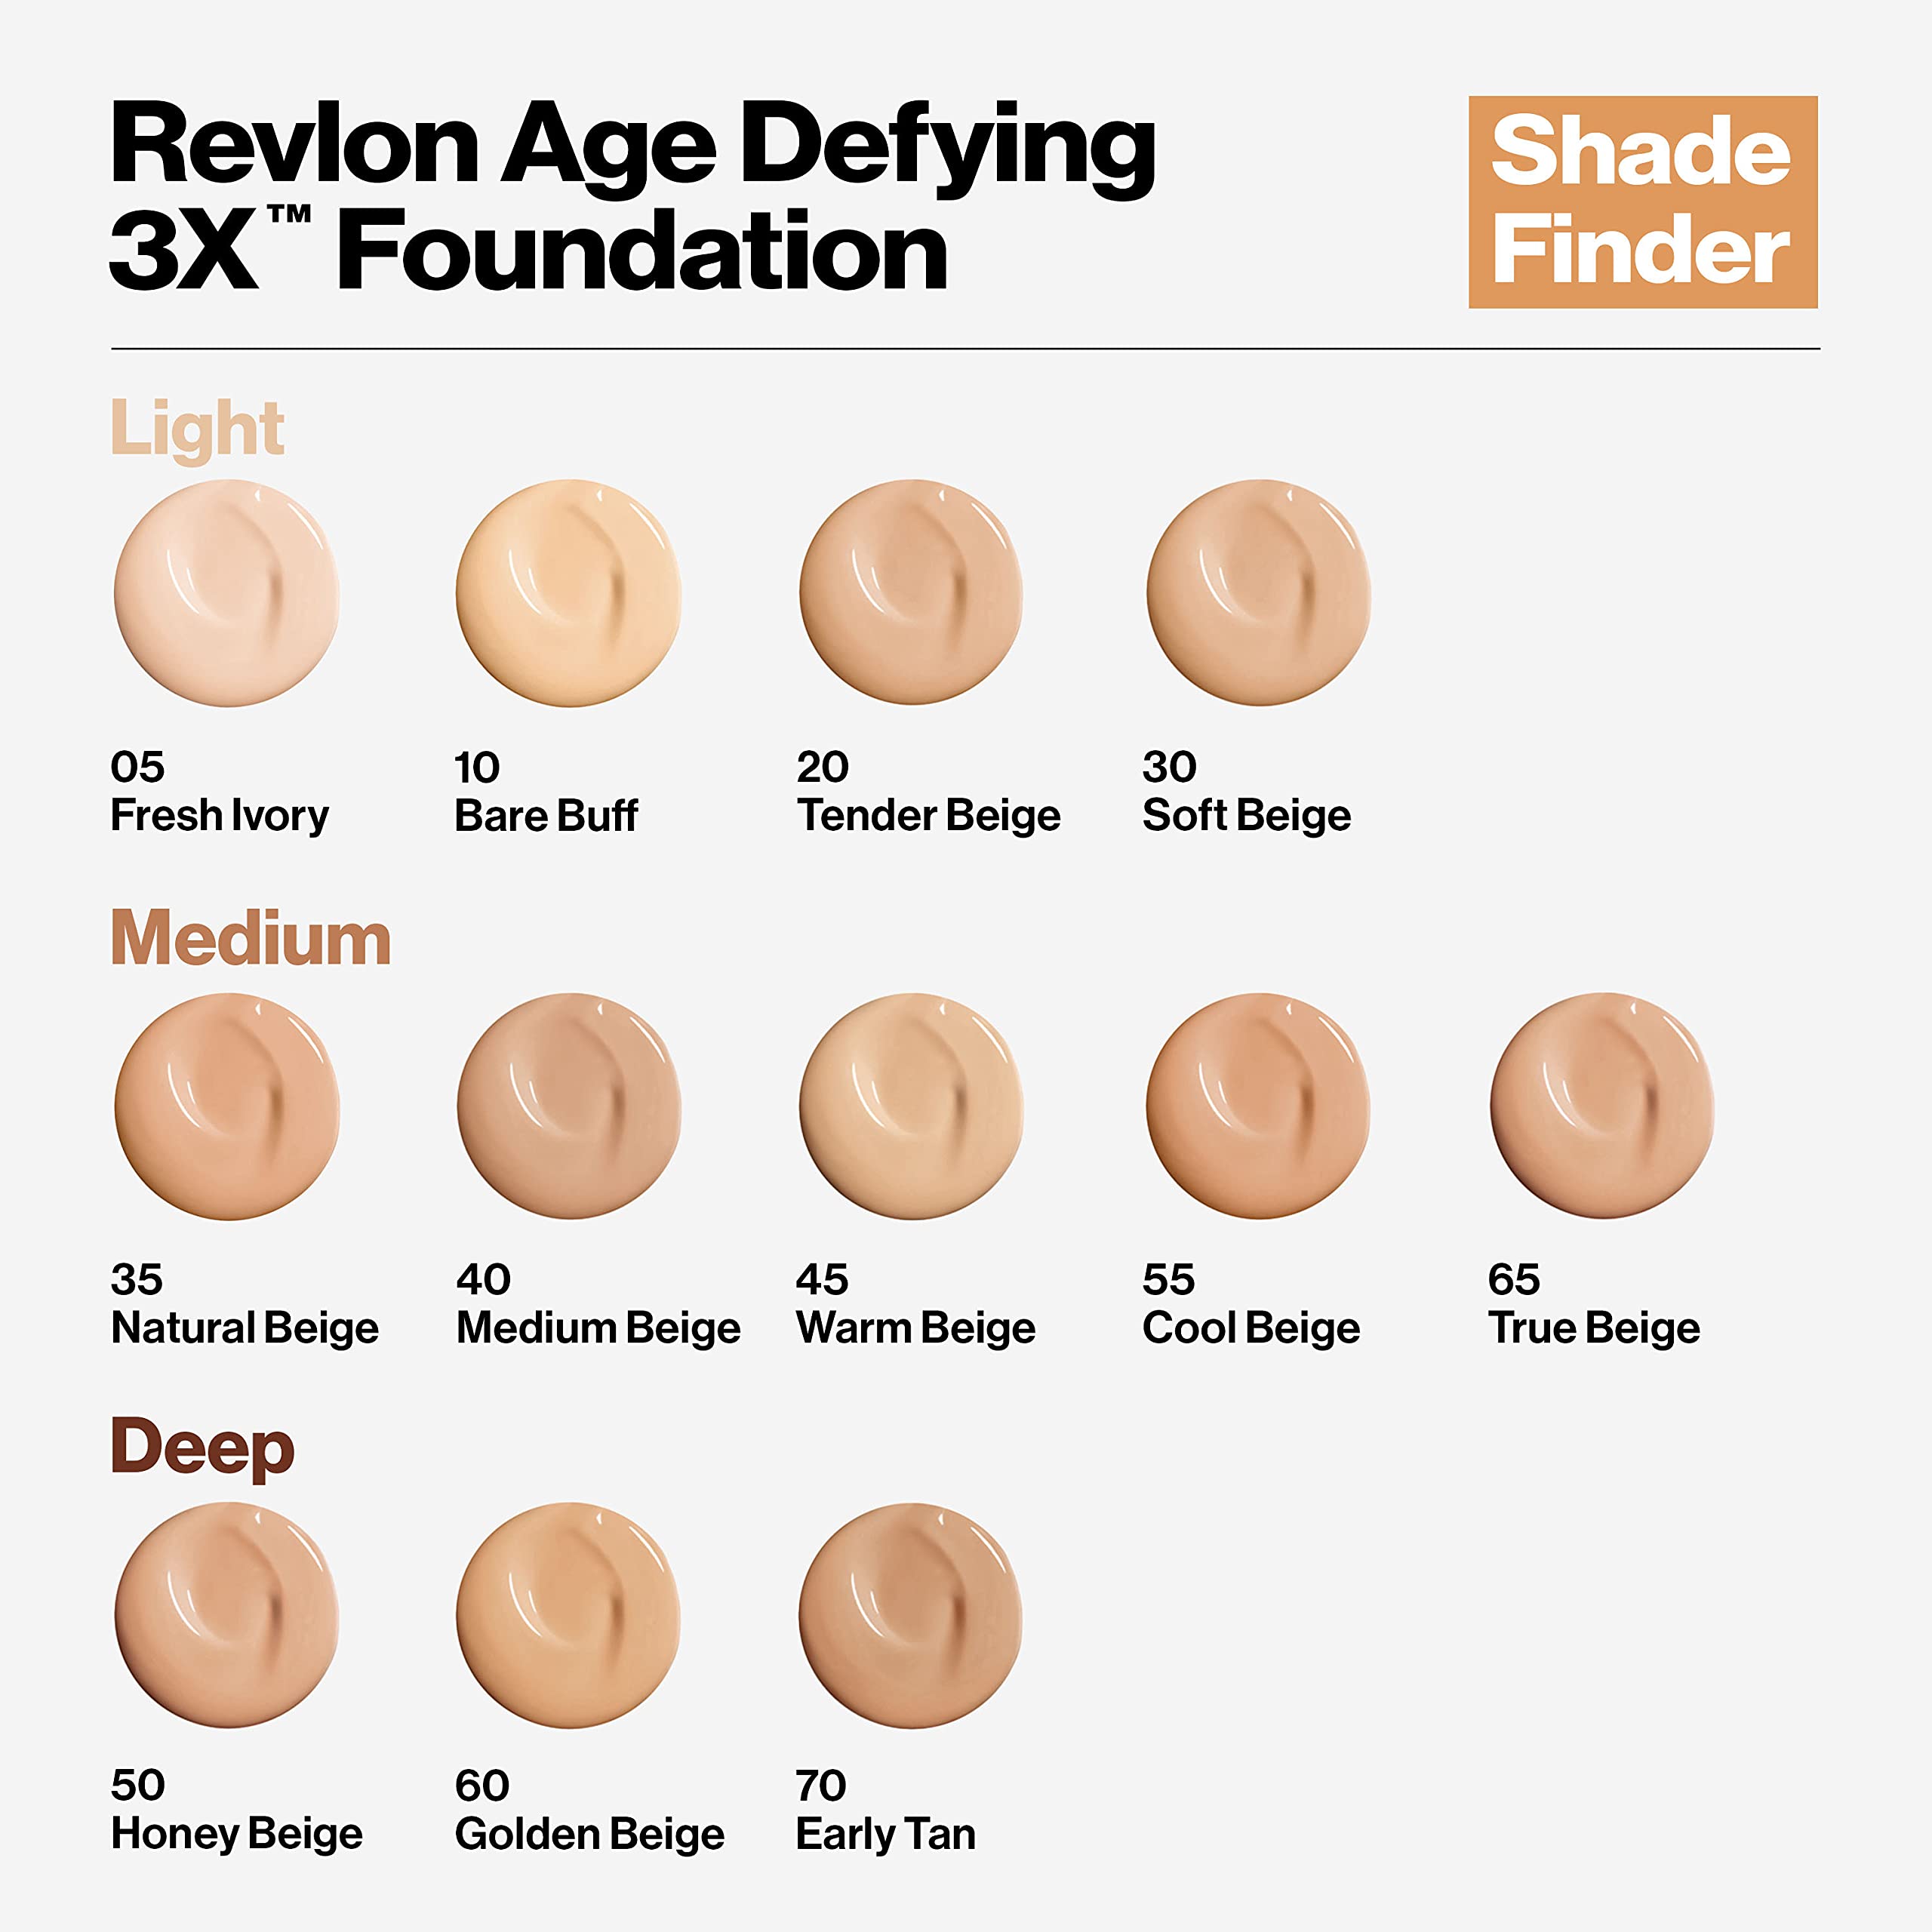 Revlon Liquid Foundation, Age Defying 3XFace Makeup, Anti-Aging and Firming Formula, SPF 30, Longwear Medium Buildable Coverage with Natural Finish, 035 Natural Beige, 1 Fl Oz